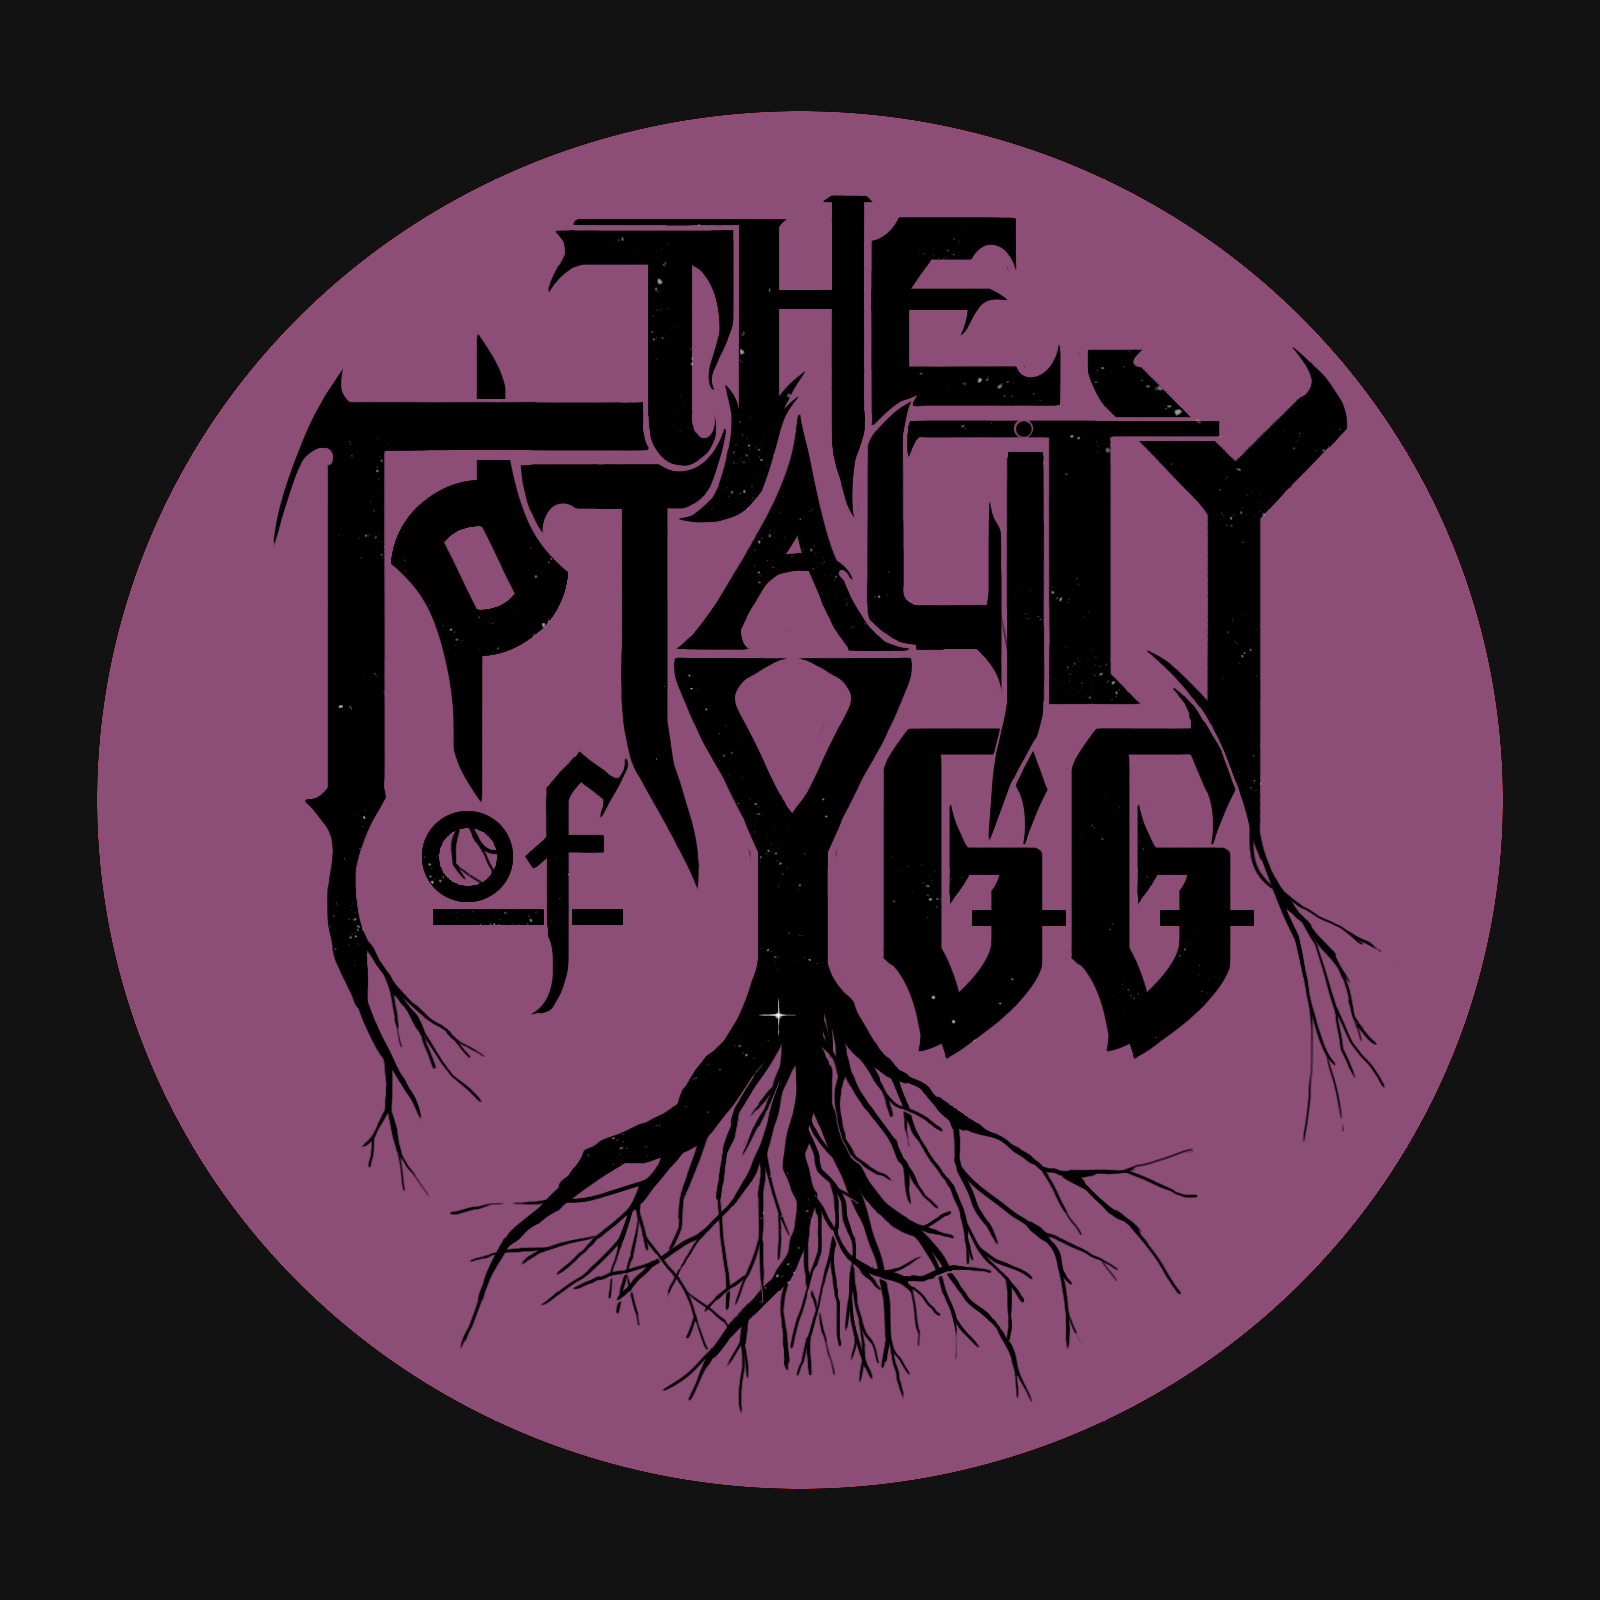 The Totality of Ygg